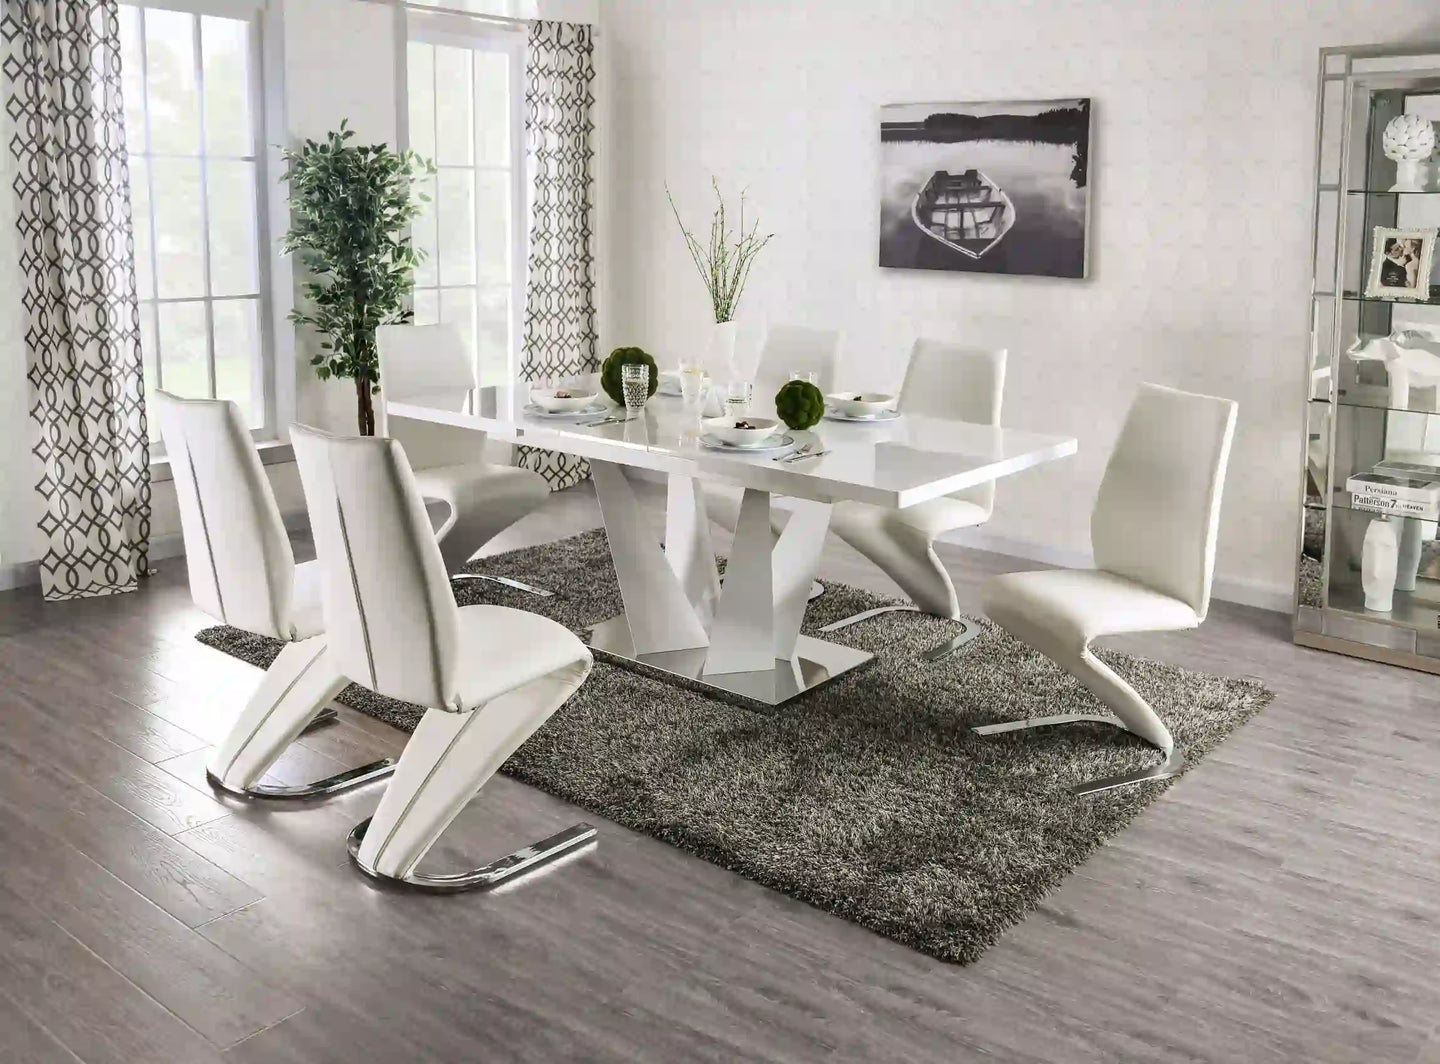 Furniture of America Soholi Contemporary Dining Table with 14